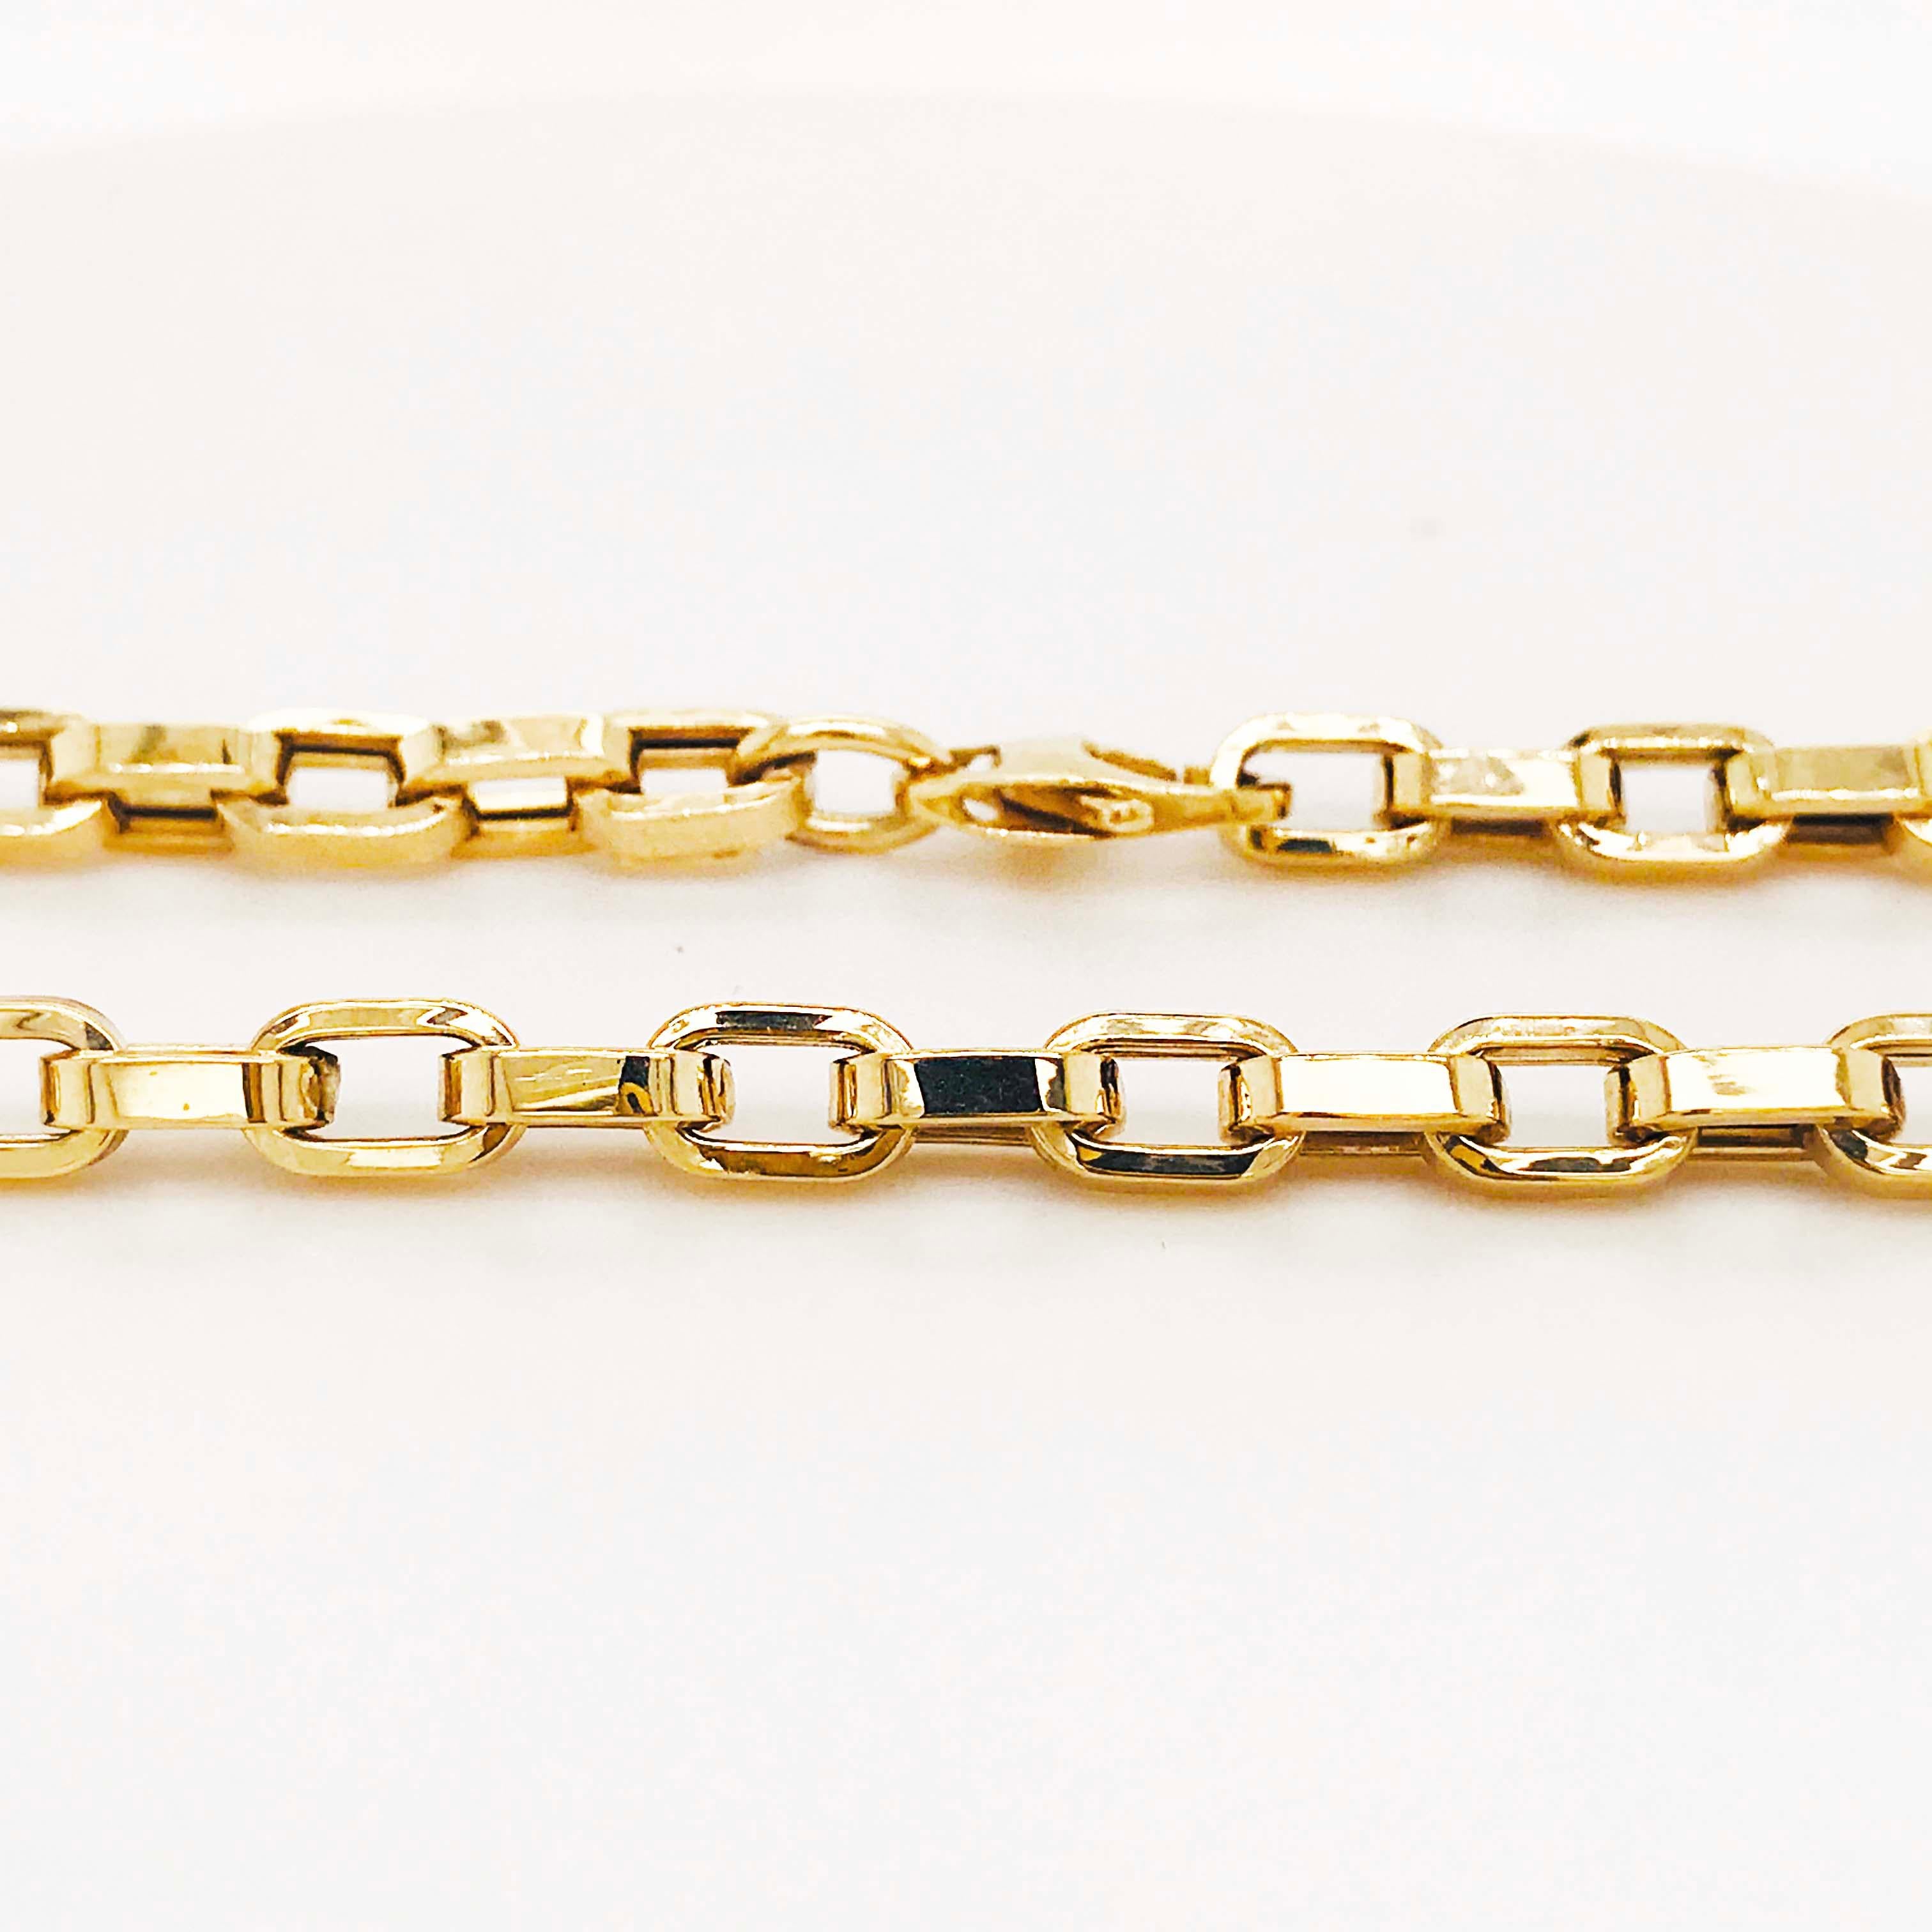 Large 14k Link Chain Necklace, PaperClip Chain Cable w Large Clasp in 14kt Gold 2